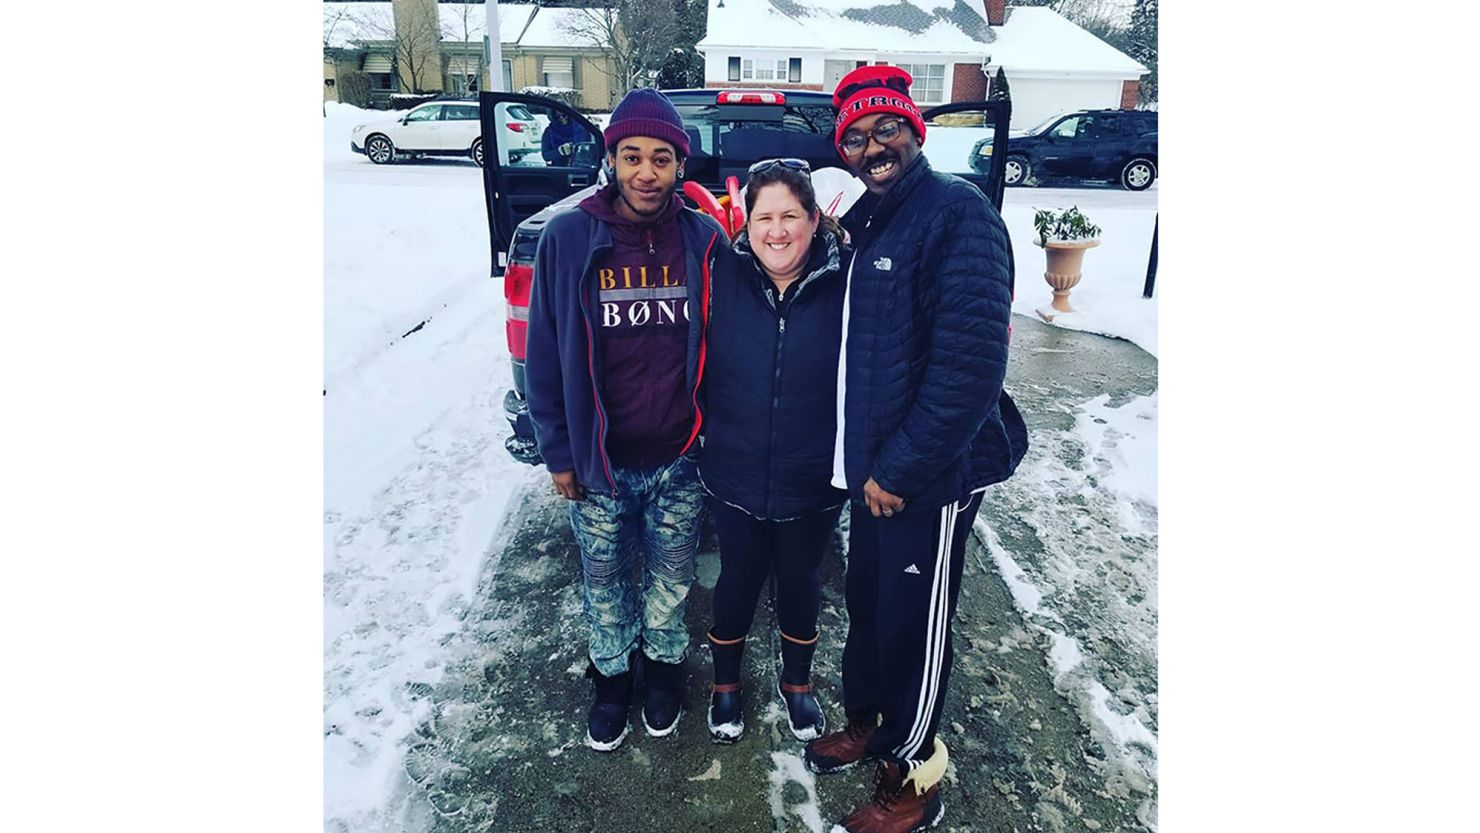 Erica Guido helped Eric Haley and Quantay Mendoza, who later decided to help Guido with deliveries.